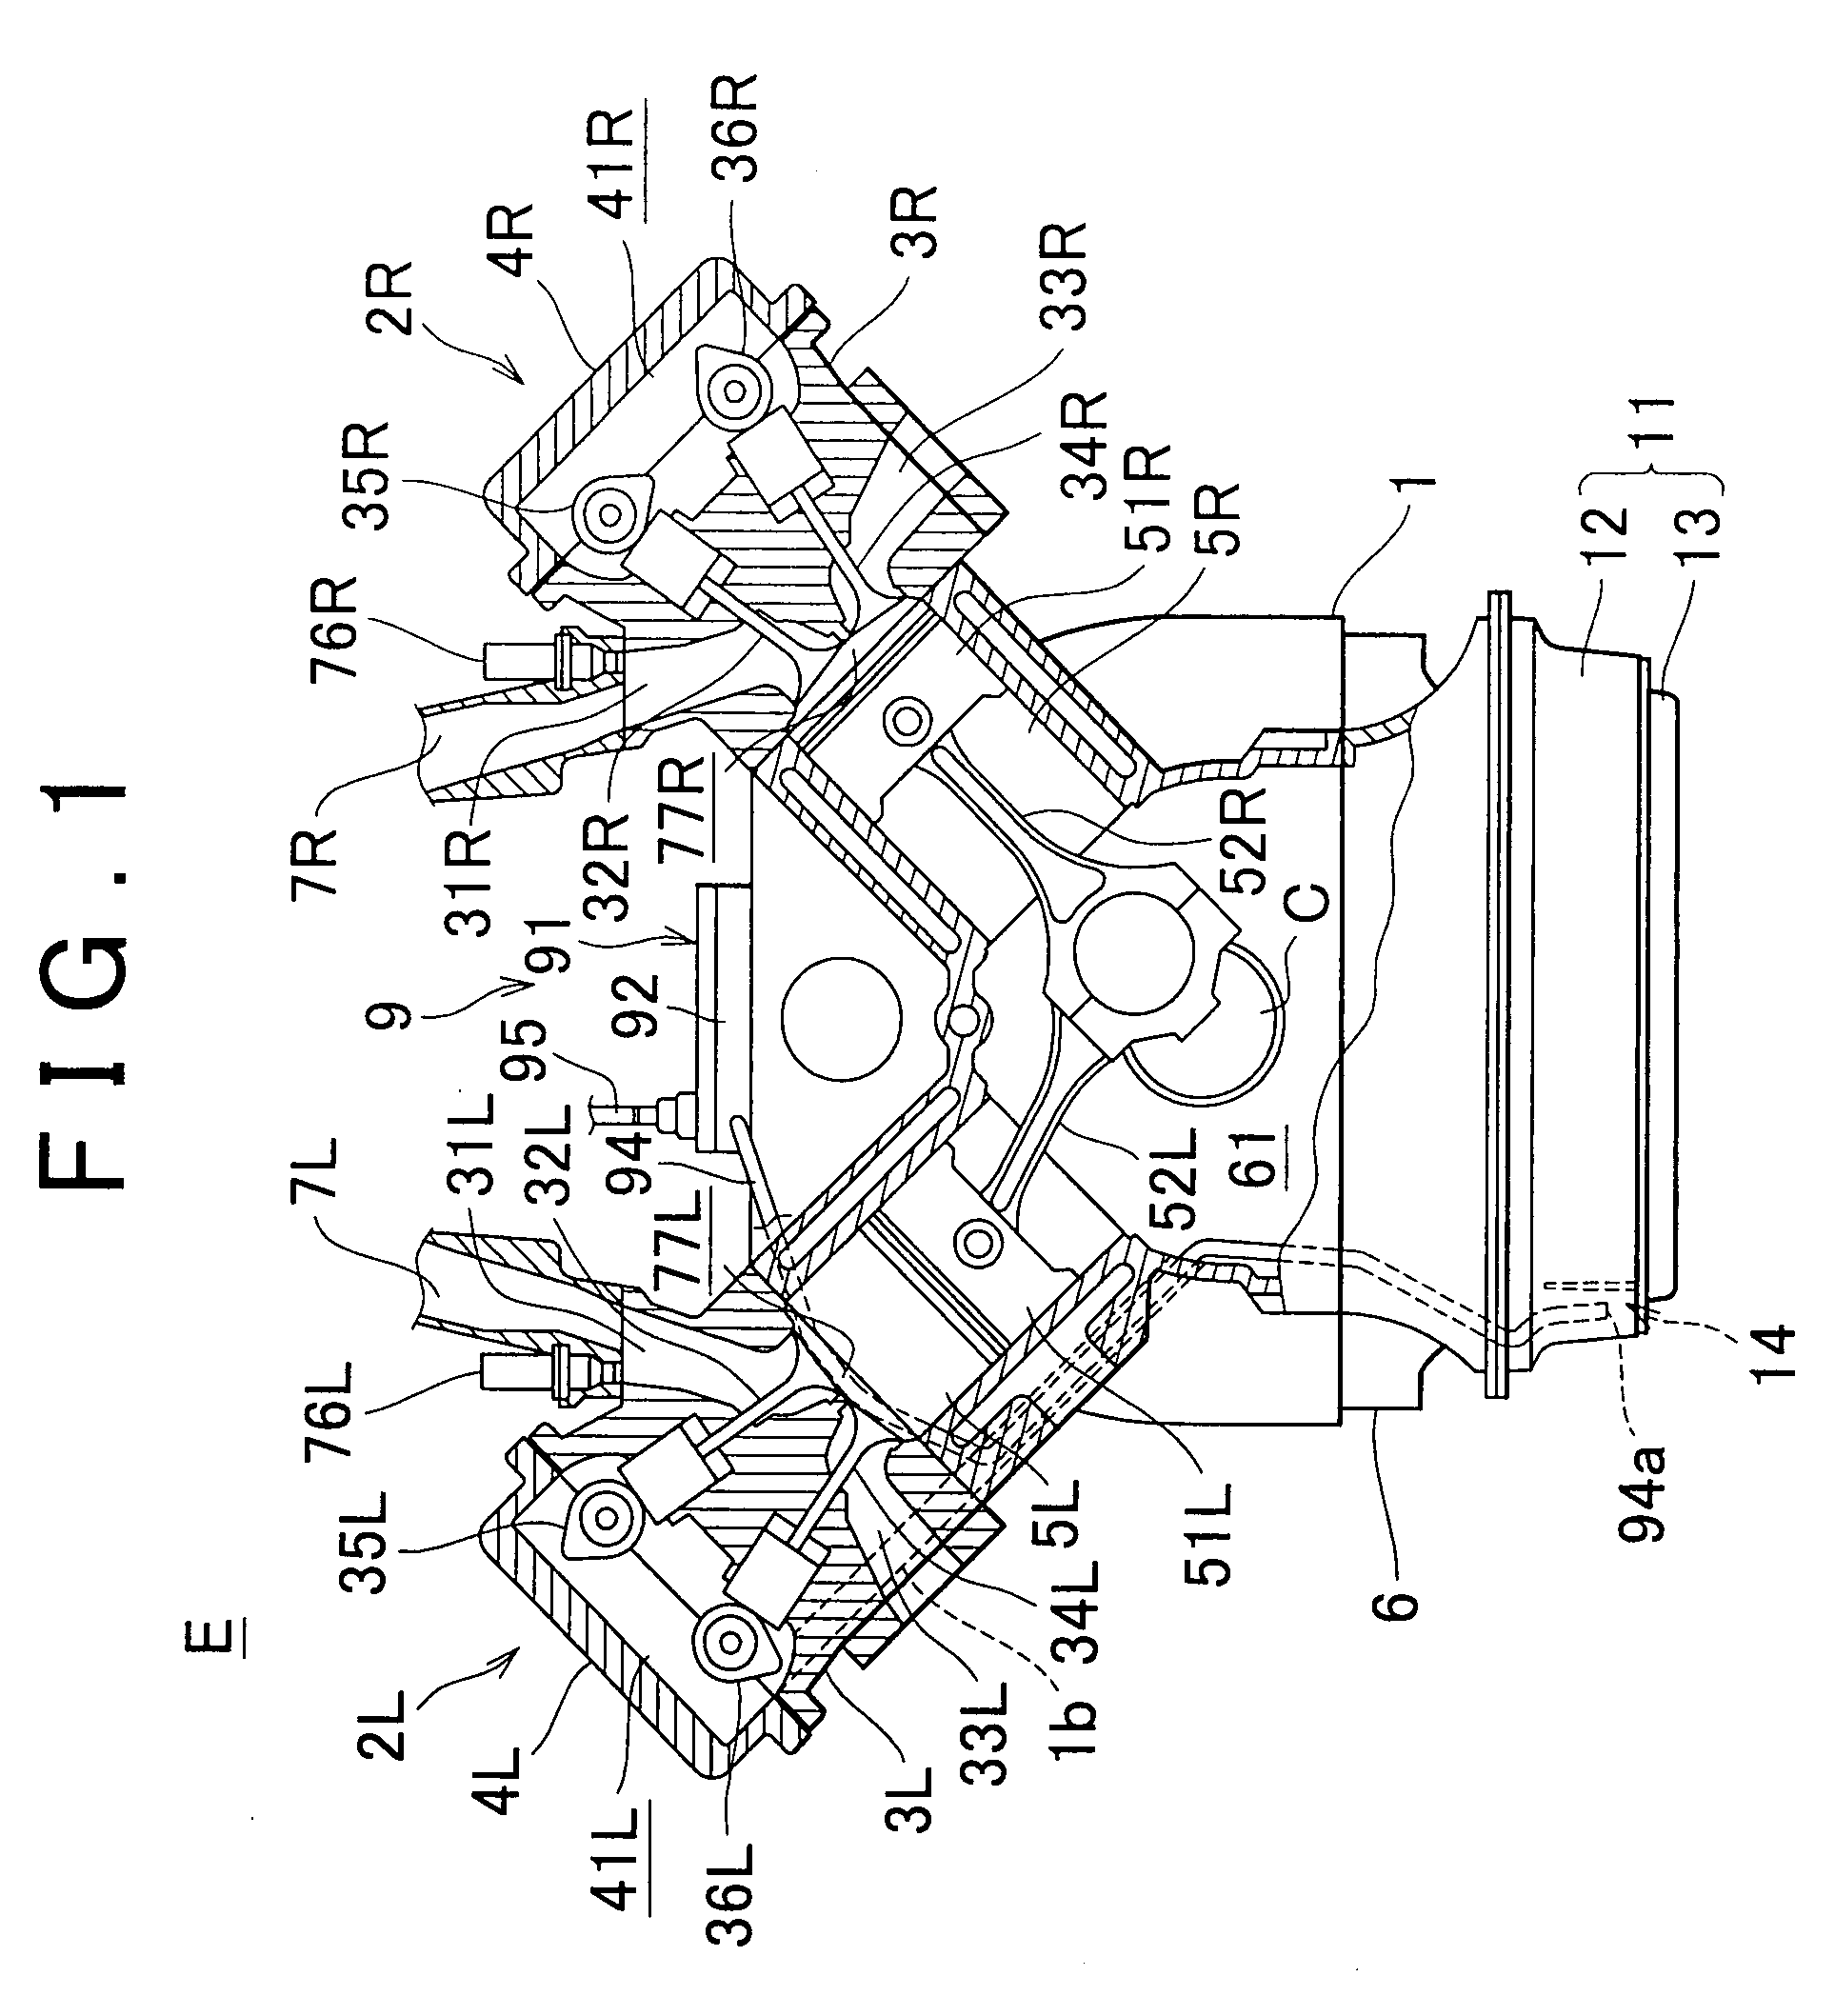 Oil return structure for internal combustion engine